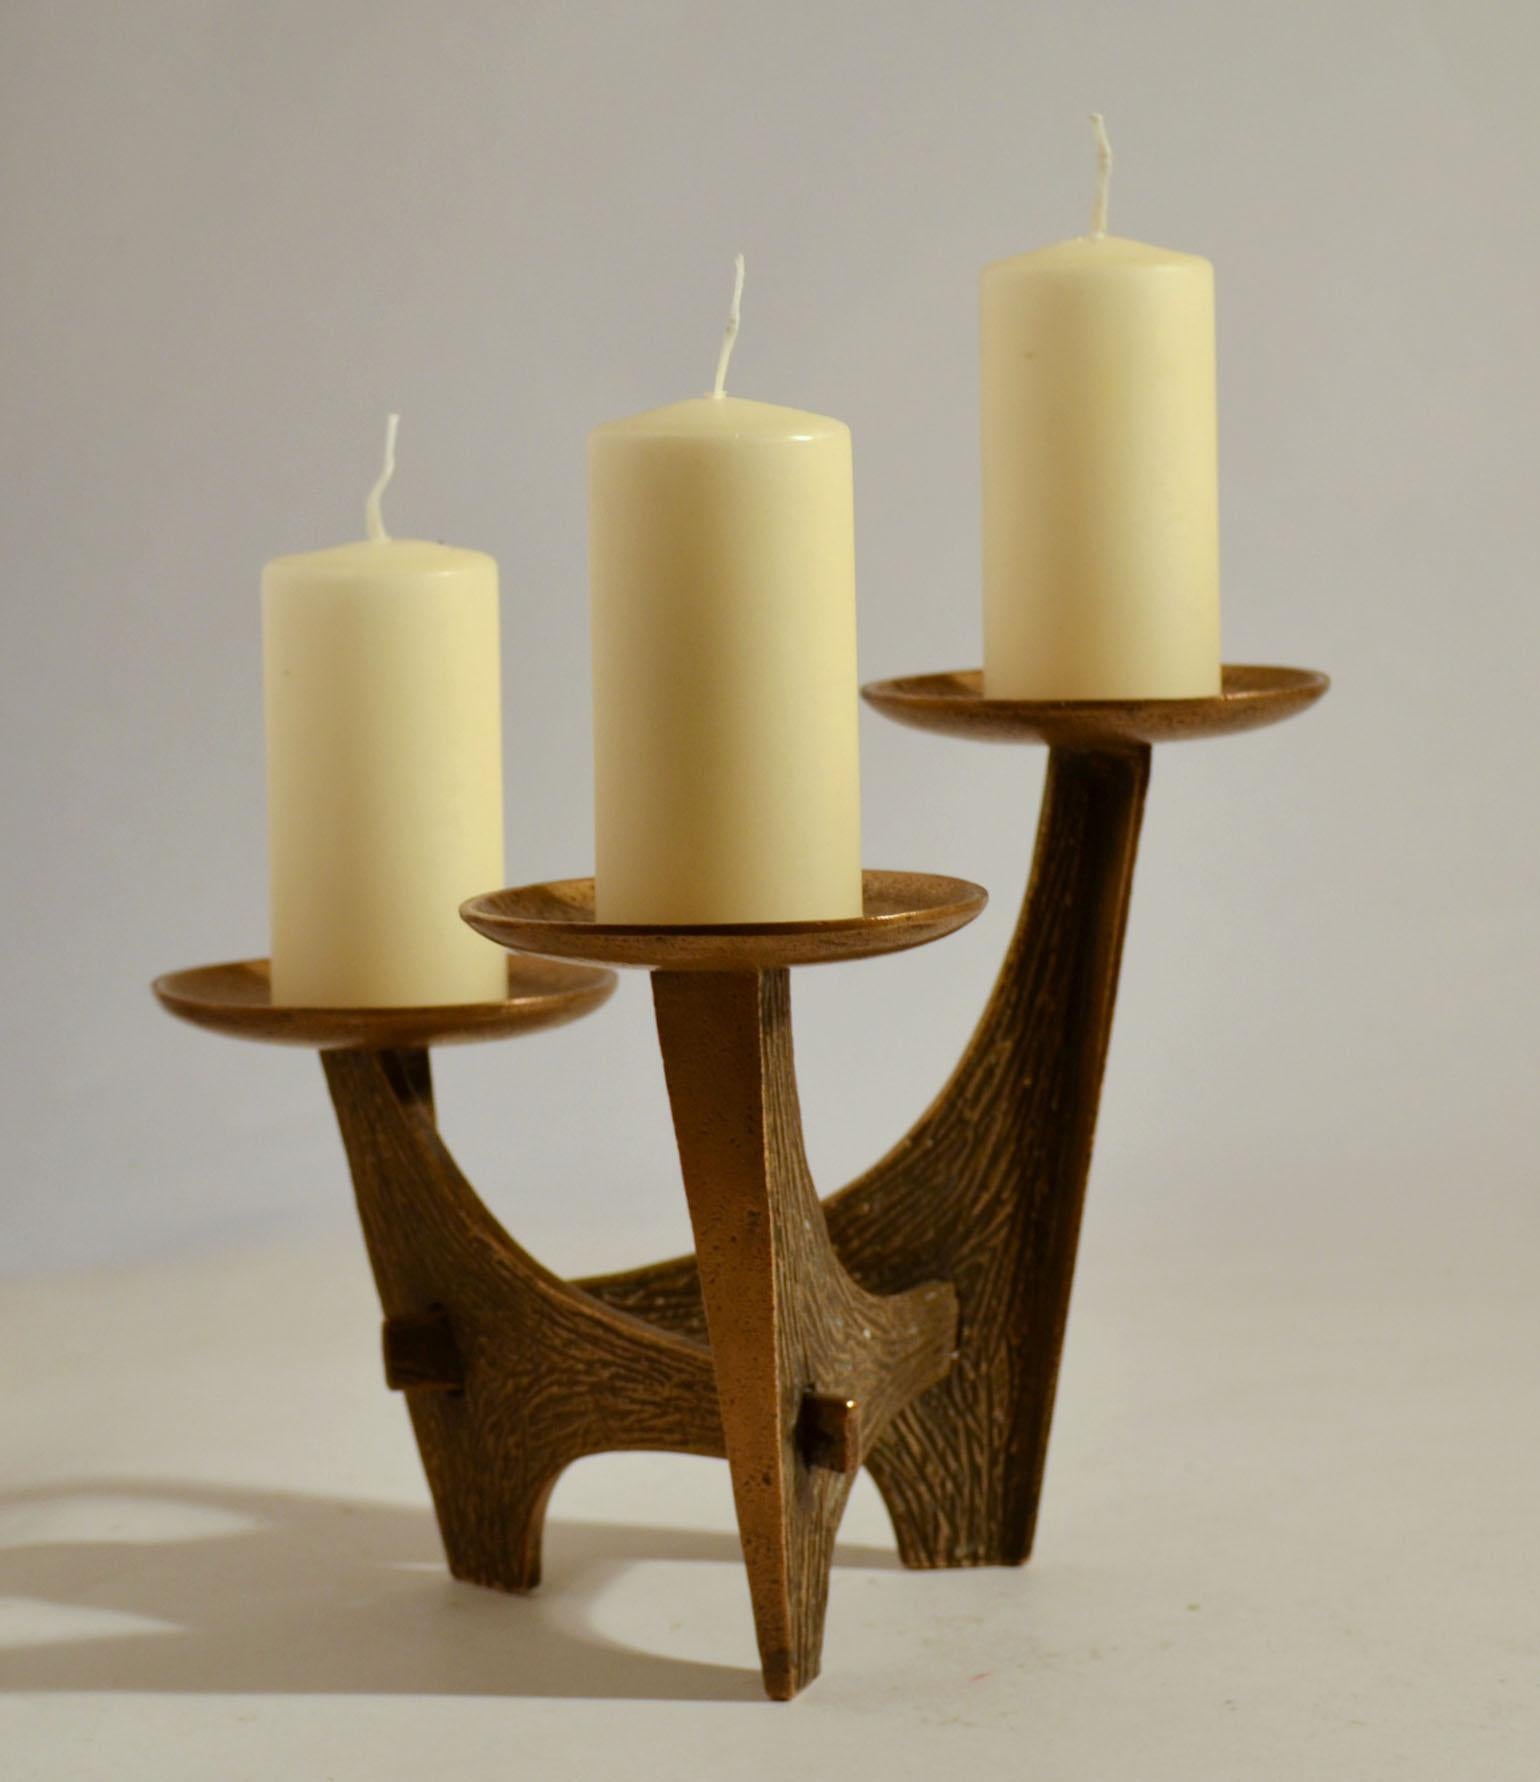 Freeform bronze cast candelabra has three alternating candle holders that can hold candles up to 6 cm diameter with a scratched texture.
It will make great sculptural decoration for the festive season.